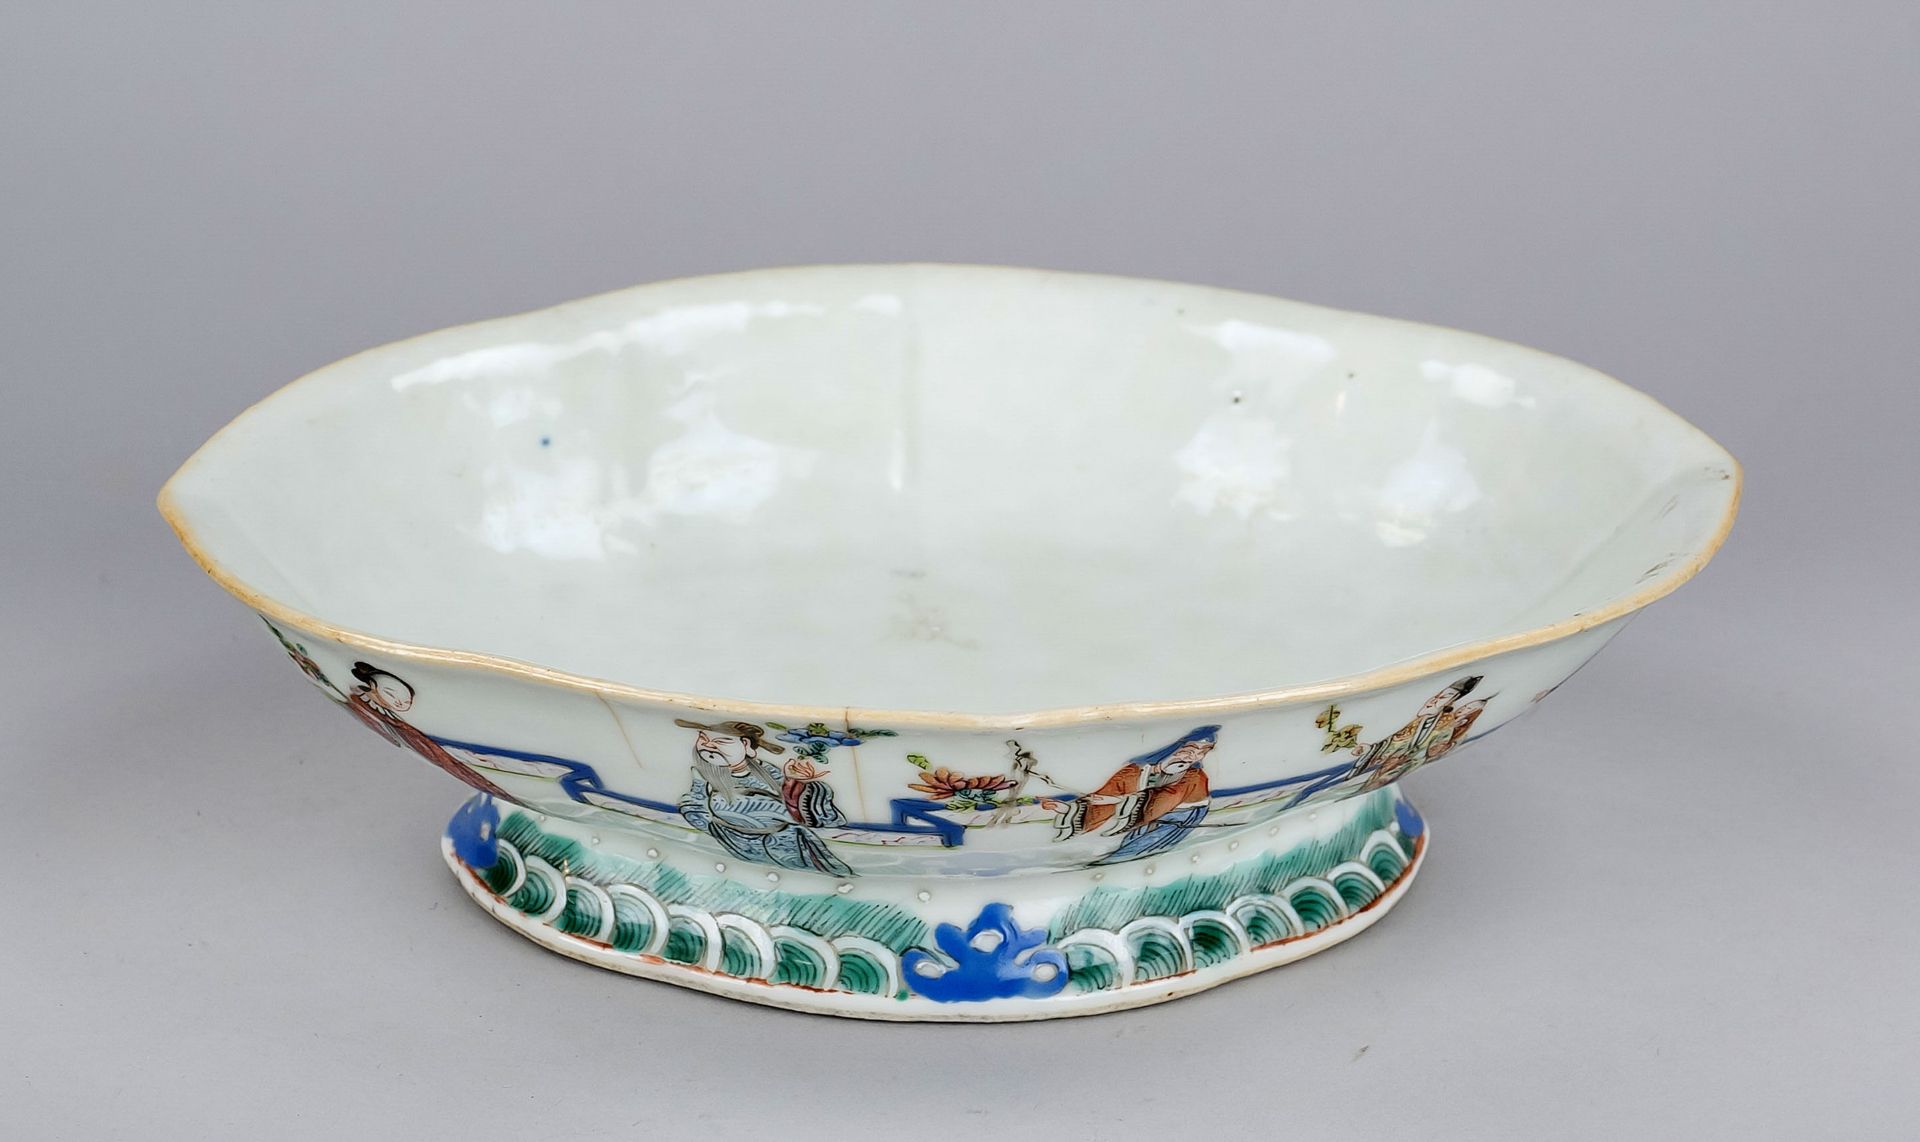 Four-pass foot bowl famille rose, China, Qing dynasty(1644-1911), porcelain with polychrome enamel